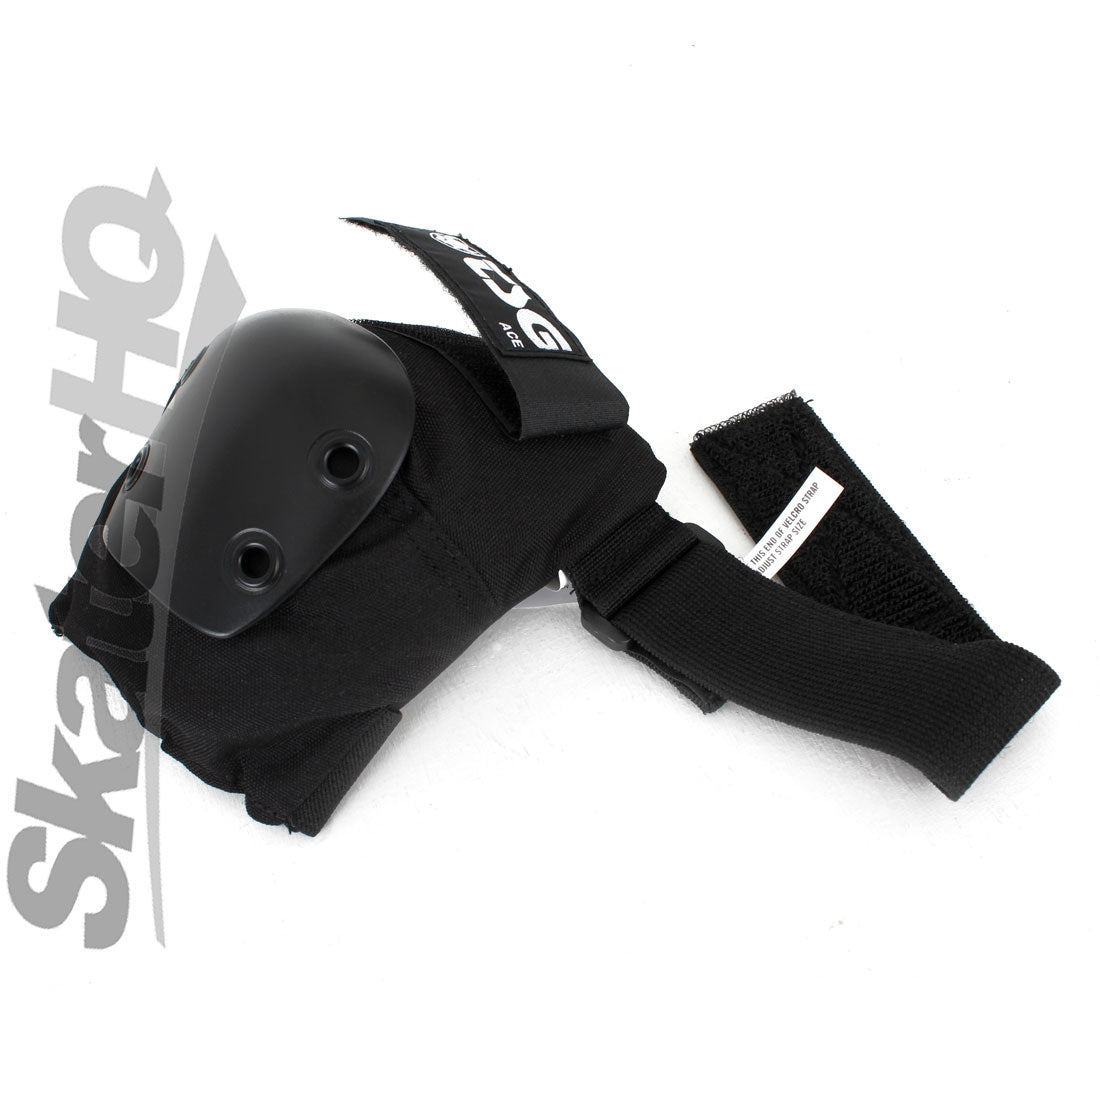 TSG Elbow Ace Pads - Large Protective Gear